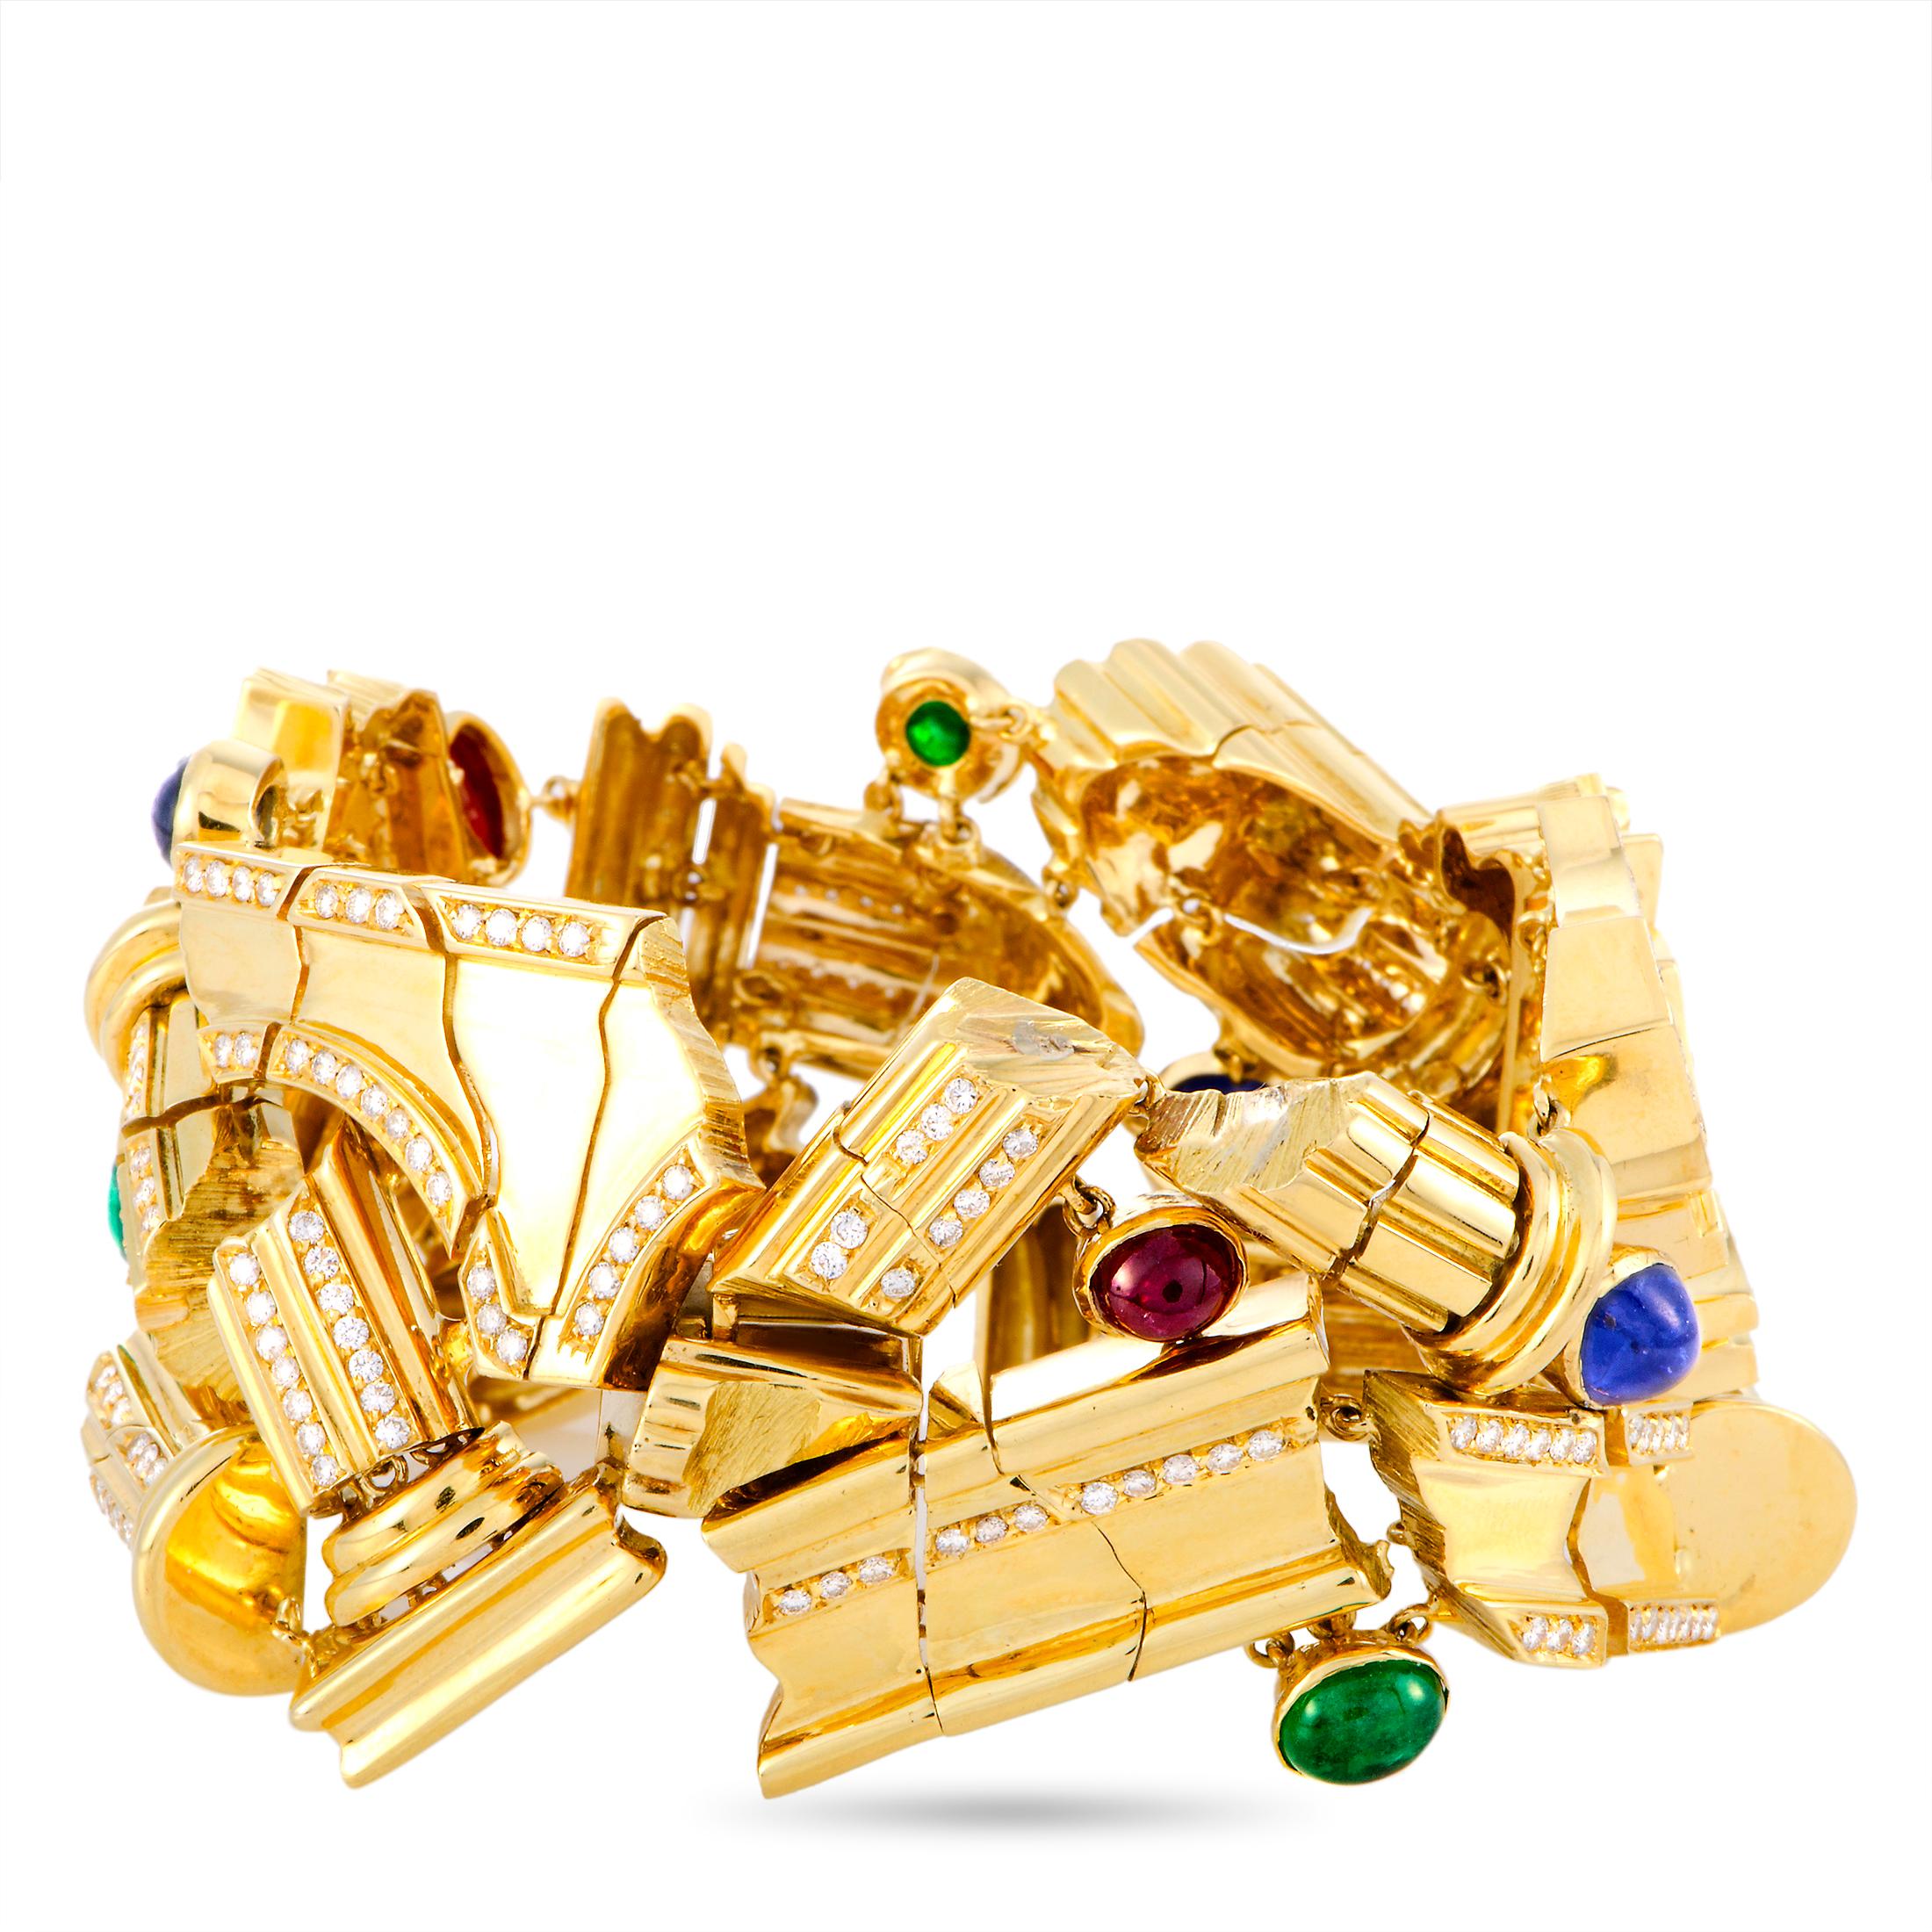 This LB Exclusive bracelet is crafted from 18K yellow gold and weighs 158.6 grams, measuring 8” in length. The bracelet is decorated with a total of 3.20 carats of diamonds, 2.90 carats of emeralds, 4.50 carats of sapphires, and 3.80 carats of